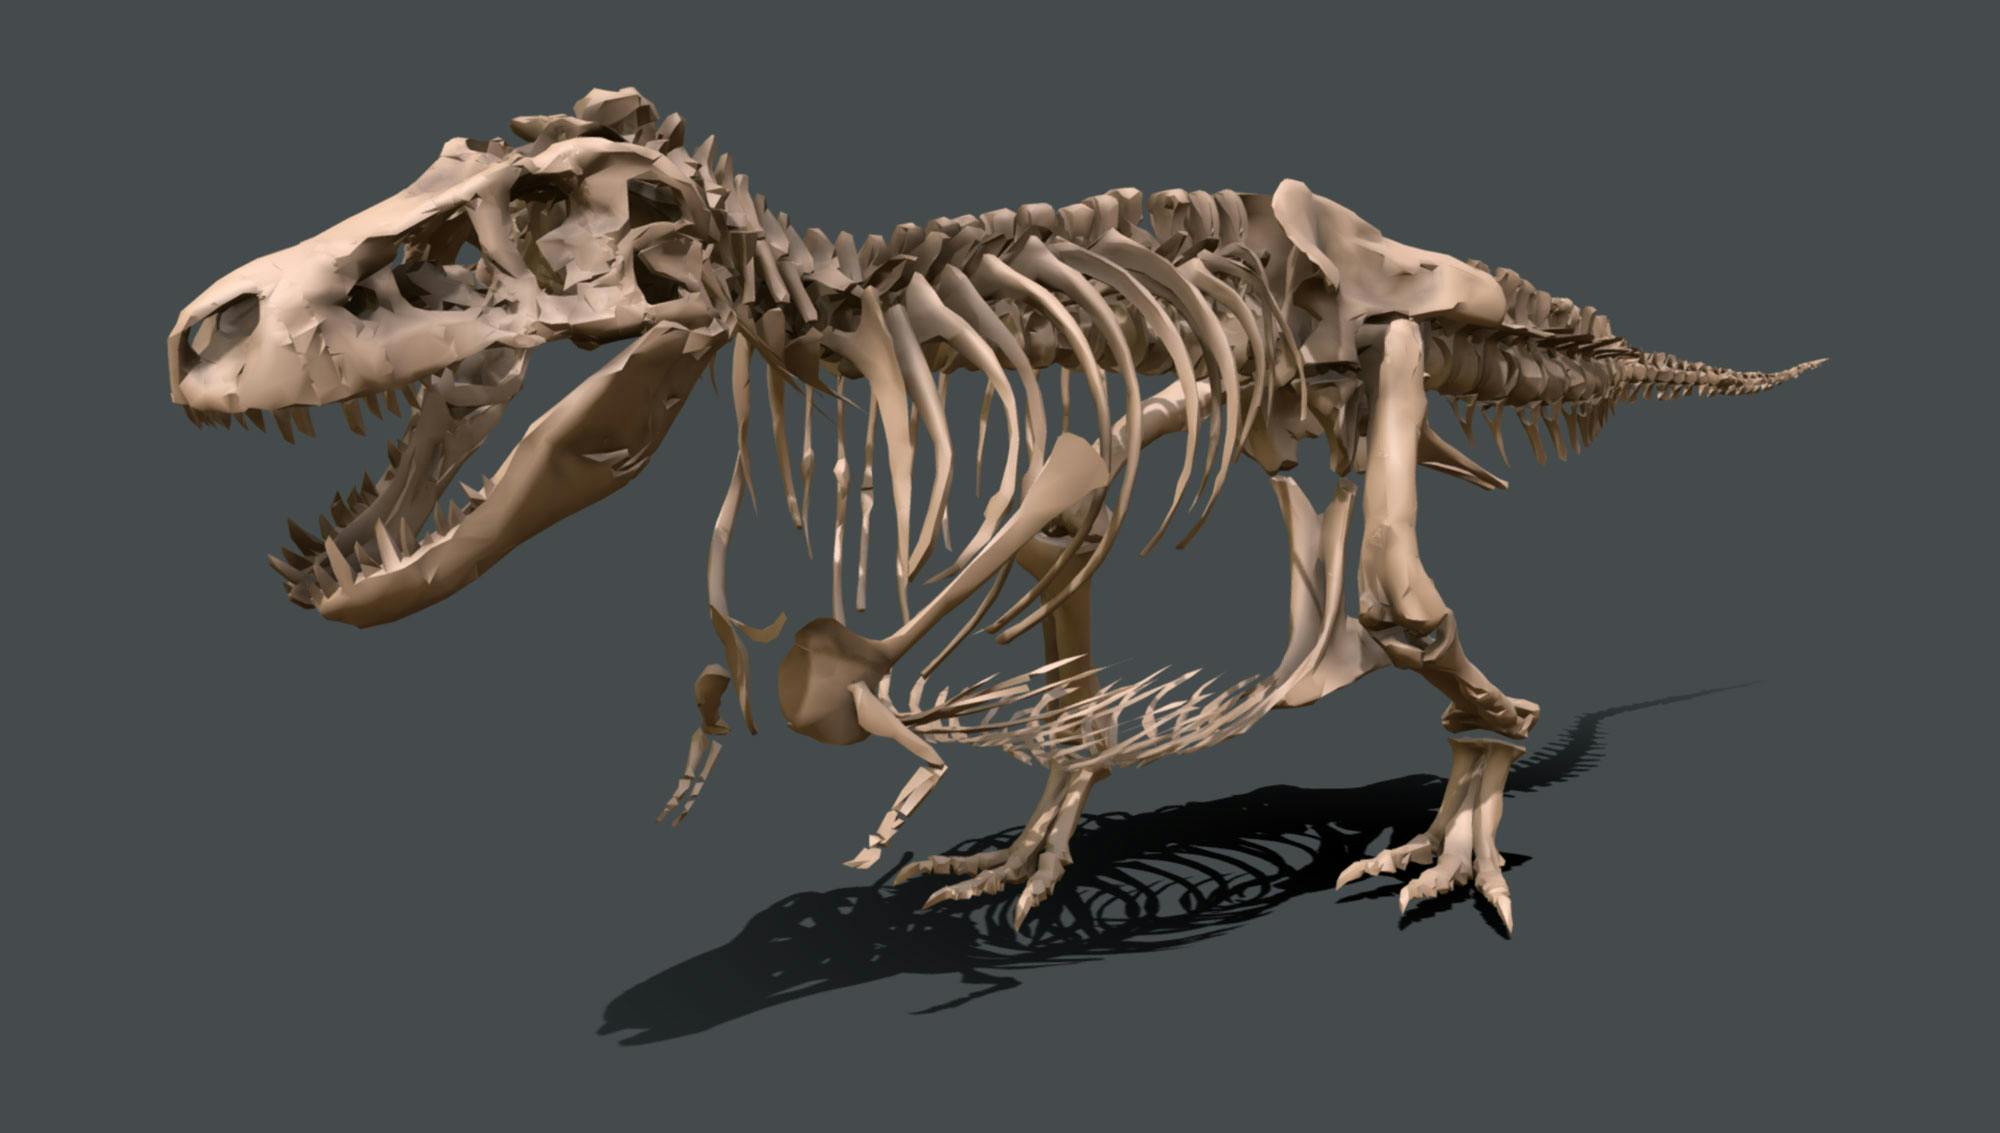 Computer graphic of SUE the T. rex skeleton.